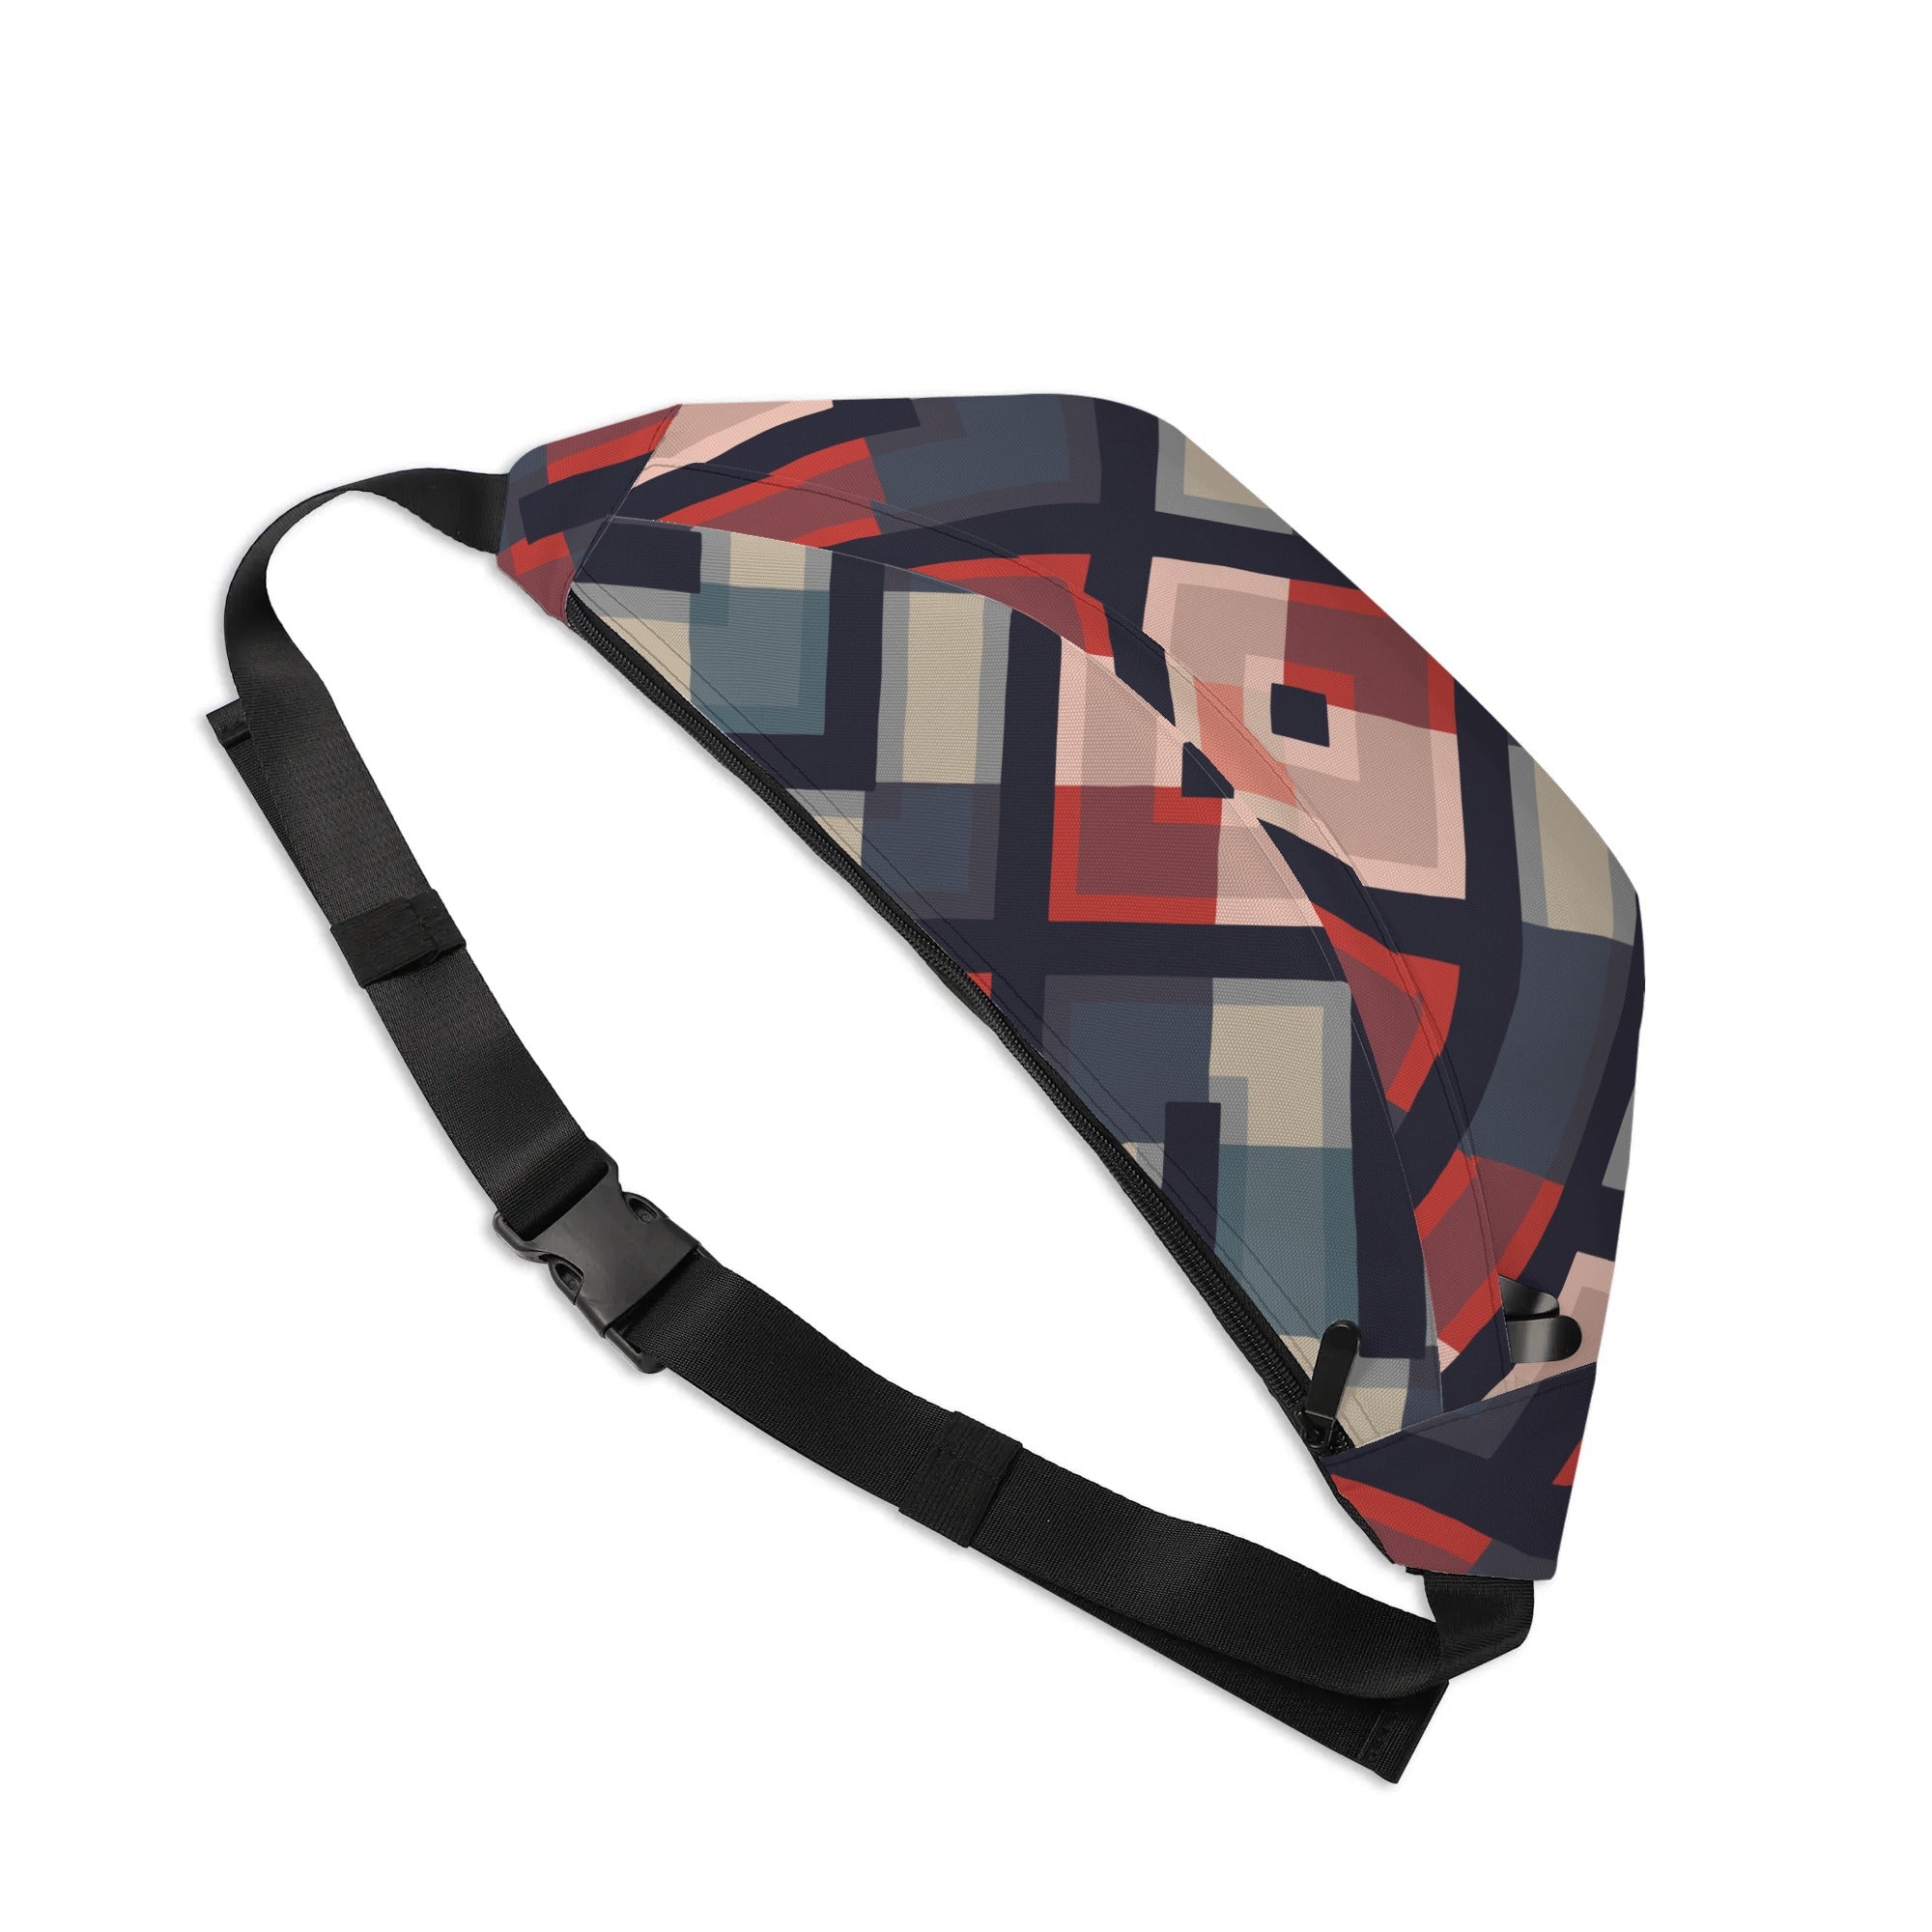 SORTYGO - Cubist Fanny Pack in